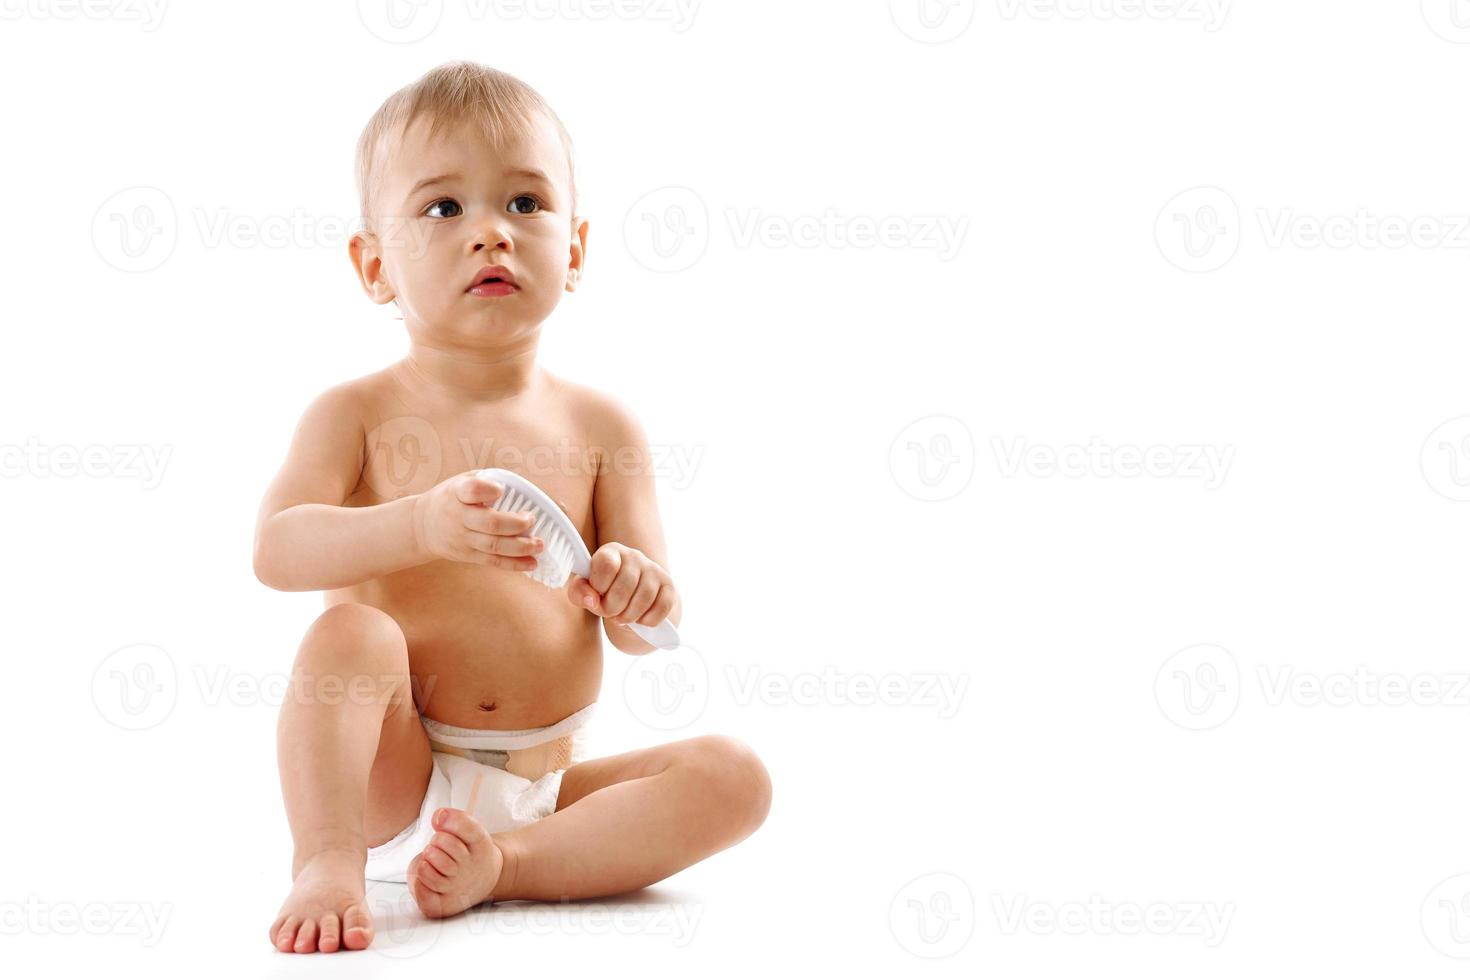 Little boy in diaper sitting and playing with brush. photo